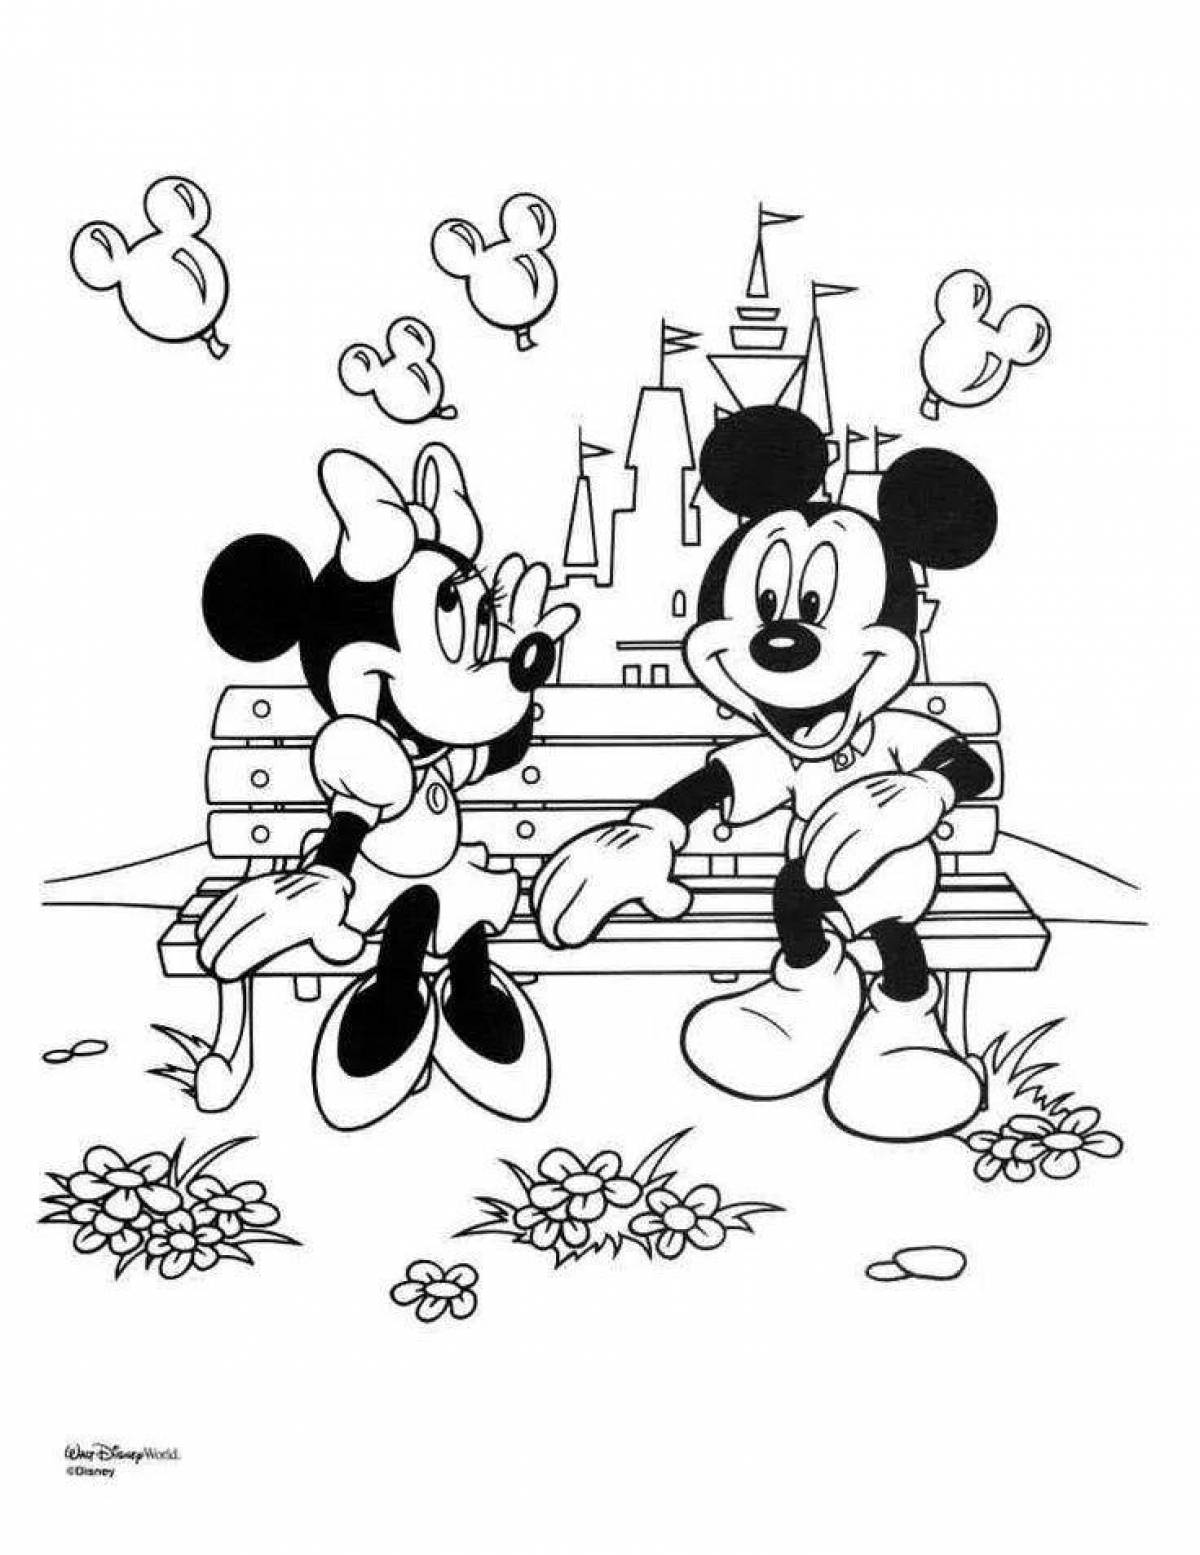 Mickey's mischievous coloring book